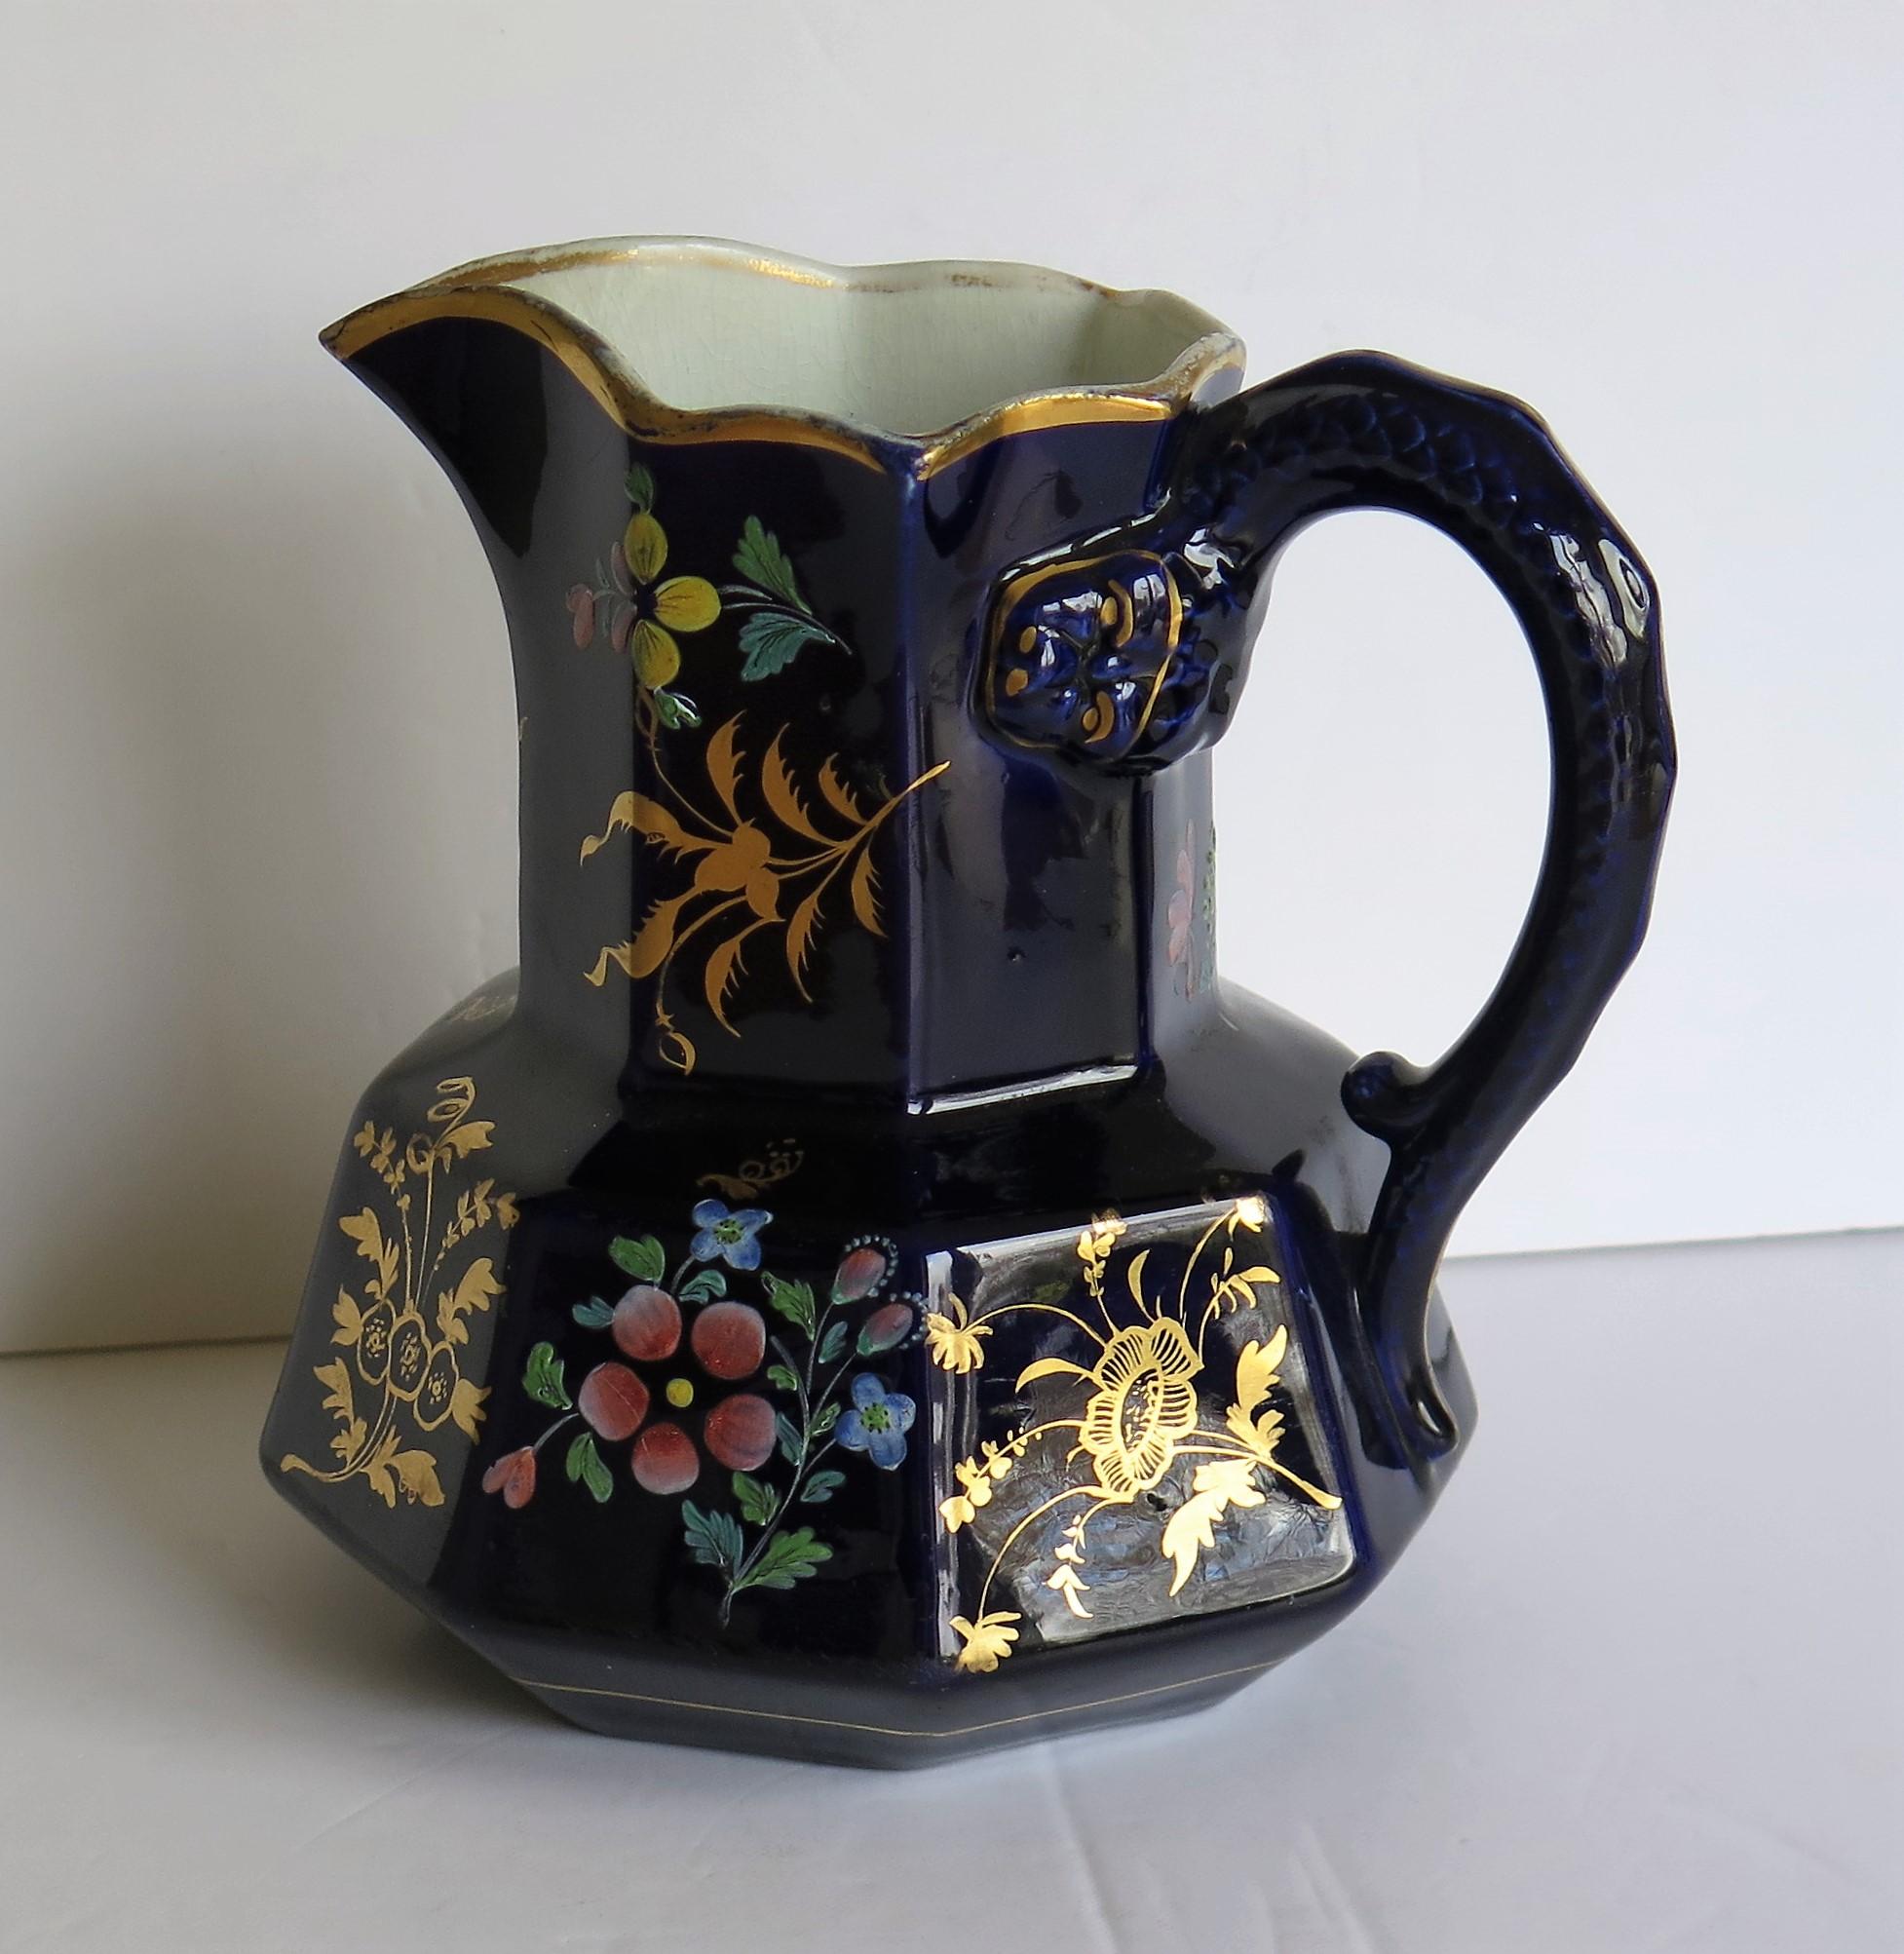 Rare Early 19th Century Ironstone Jug or Pitcher, Zachariah Boyle Hand Enamelled 1